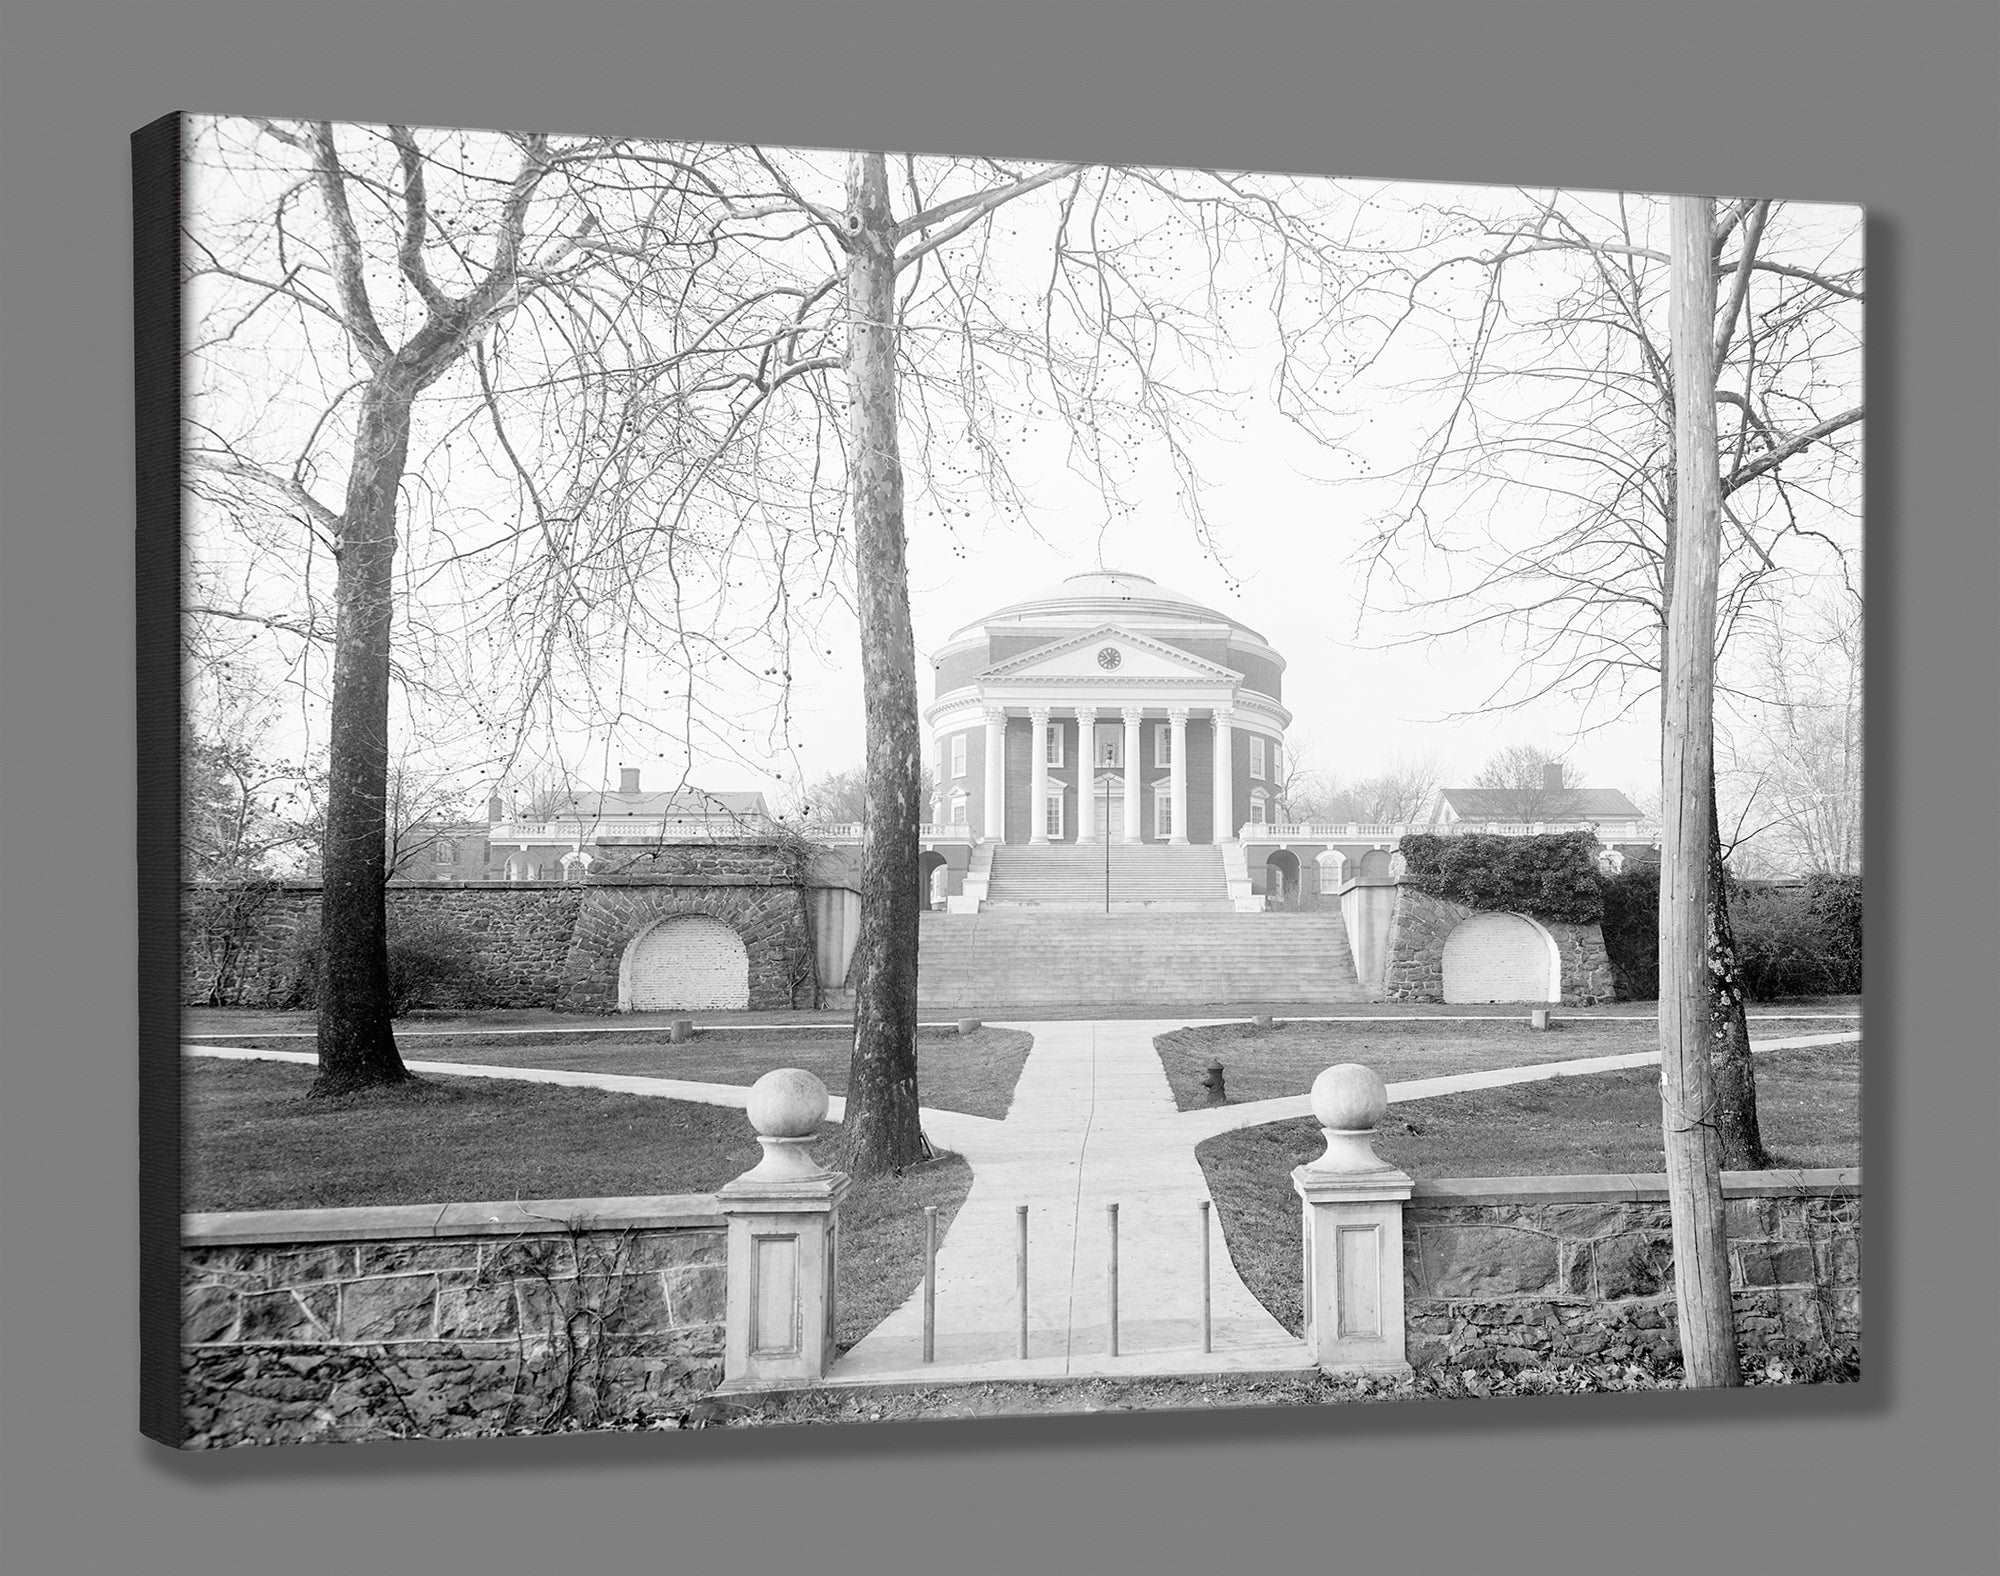 A canvas print reproduction of a vintage photograph of the Rotunda at the University of Virginia